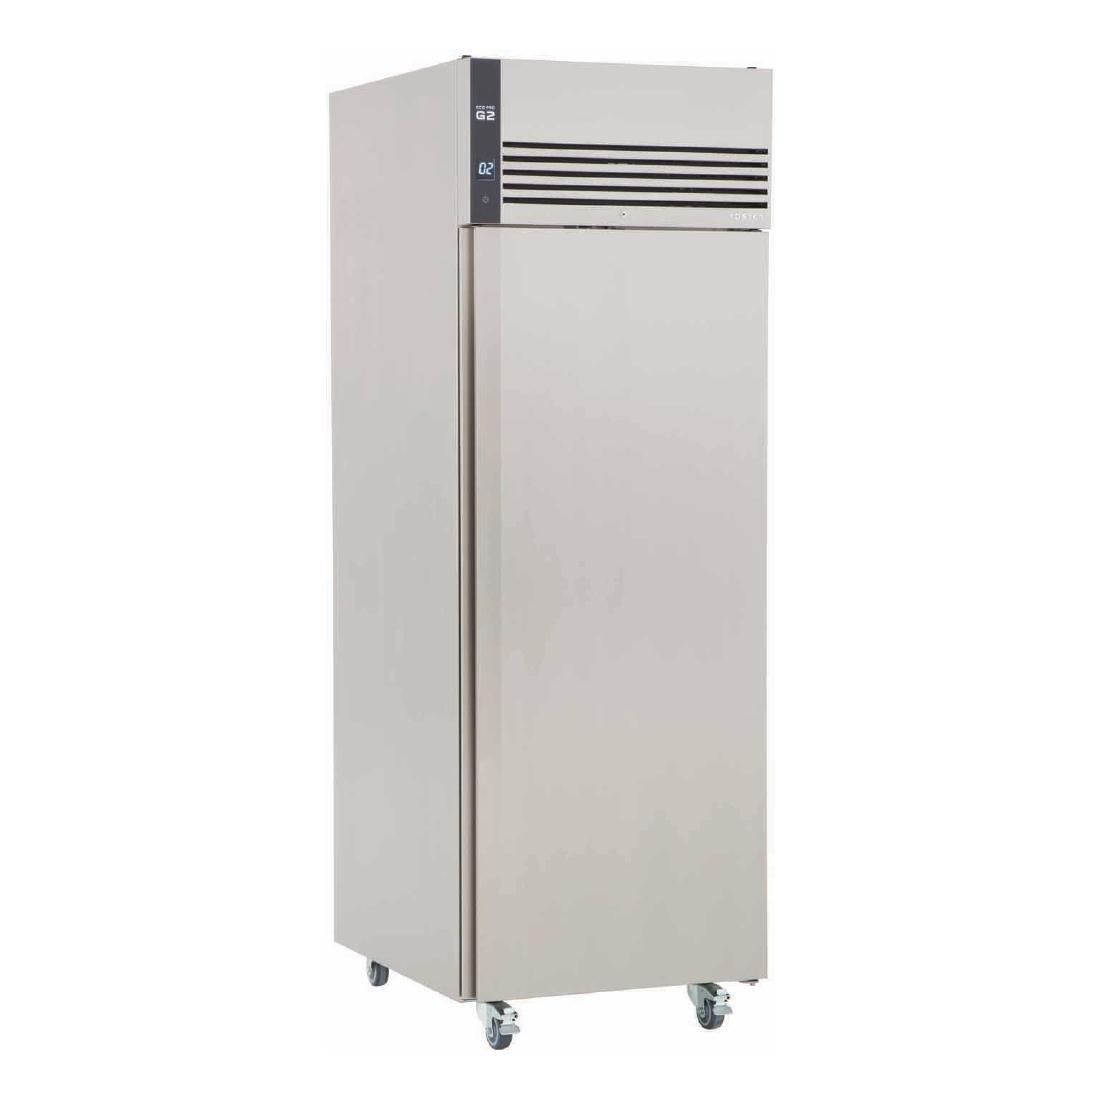 Foster EcoPro G2 1 Door 600Ltr Cabinet Freezer with Back EP700L 10/119